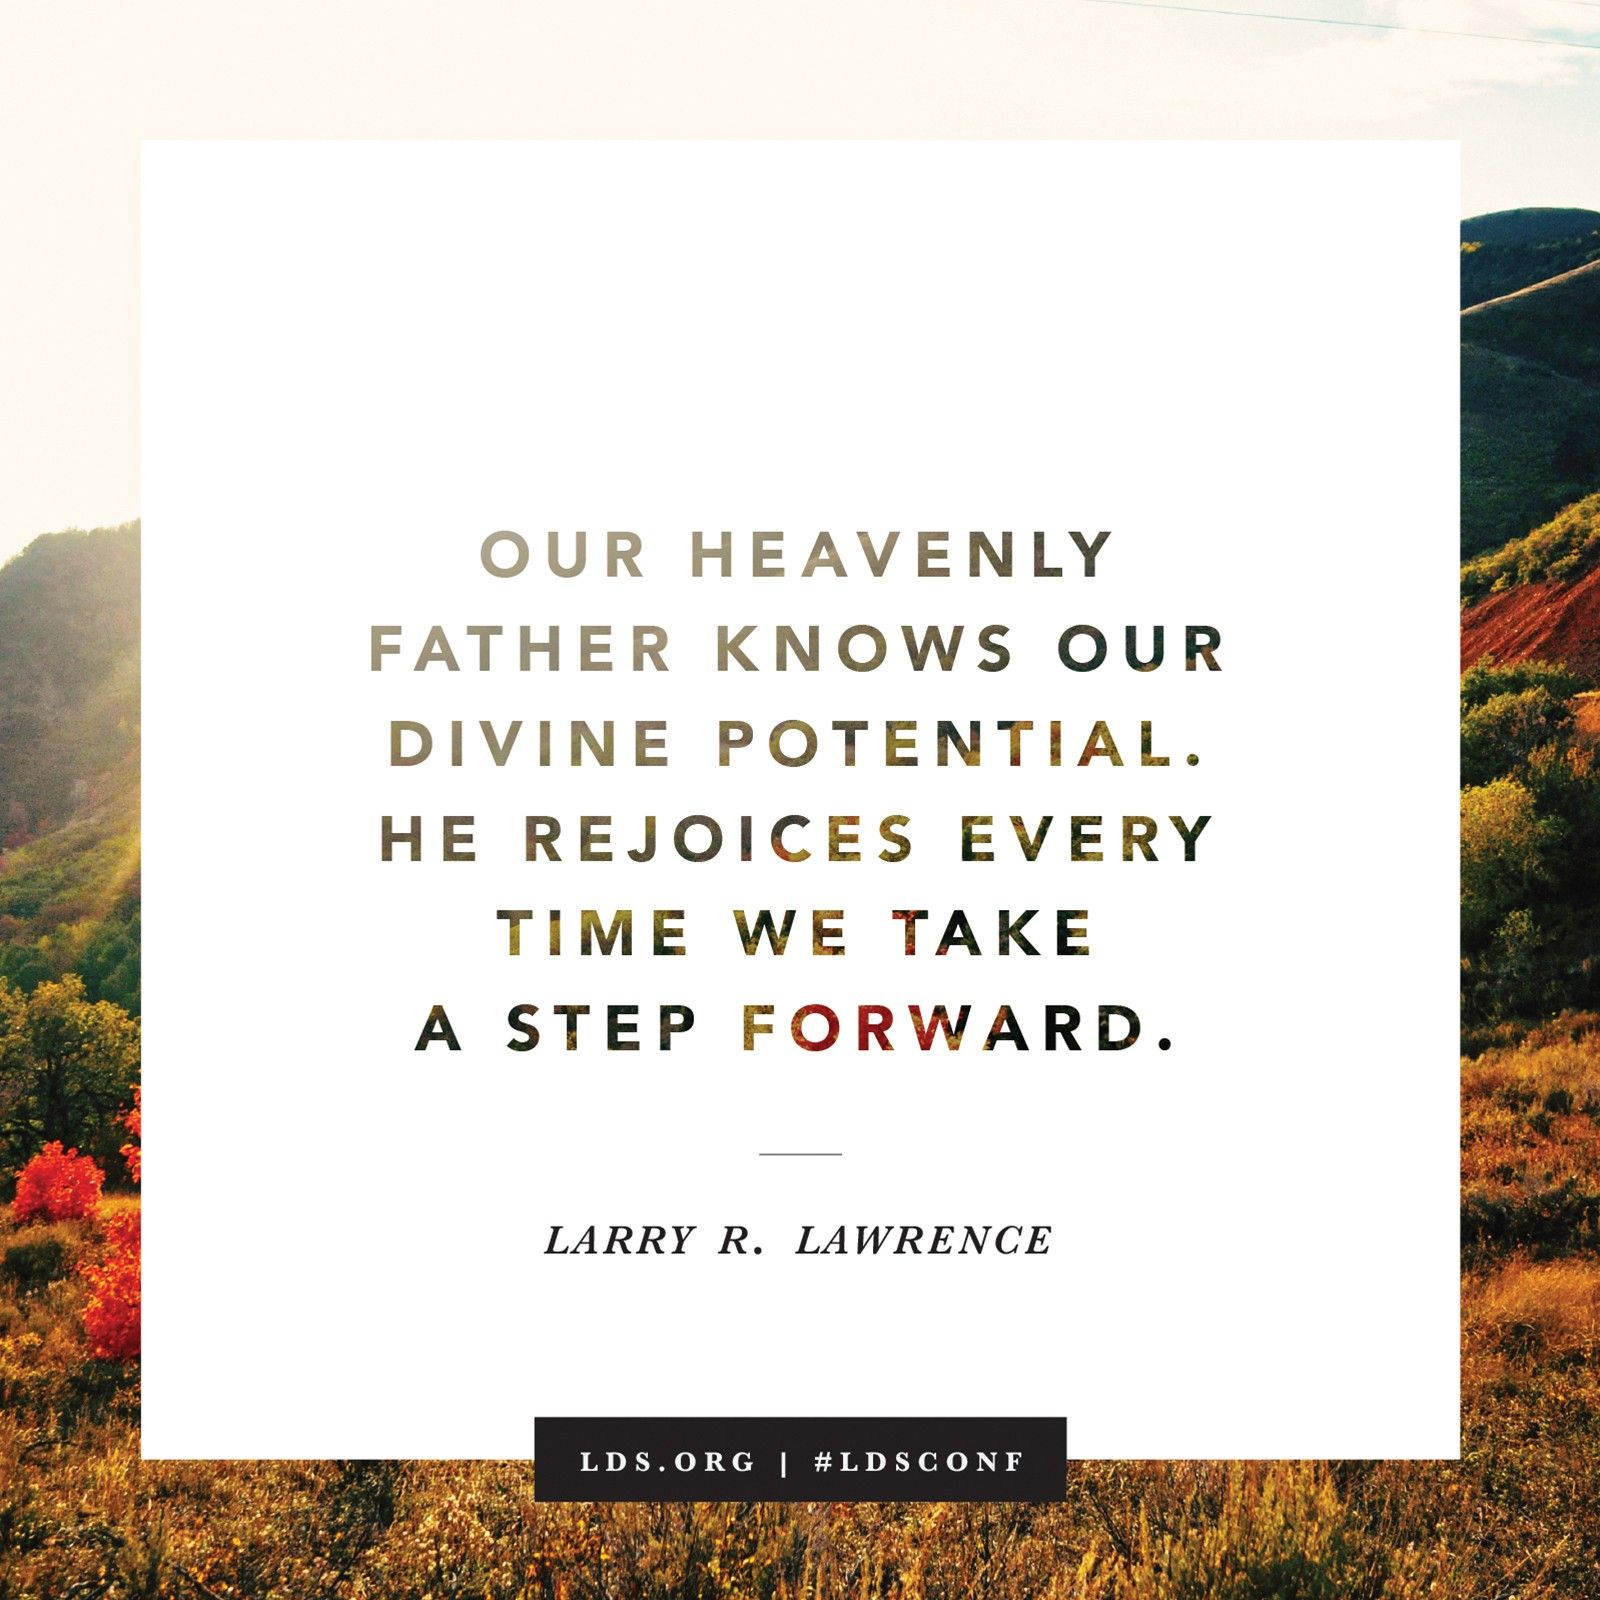 “Our Heavenly Father knows our divine potential. He rejoices every time we take a step forward.” —Elder Larry R. Lawrence, “What Lack I Yet?”